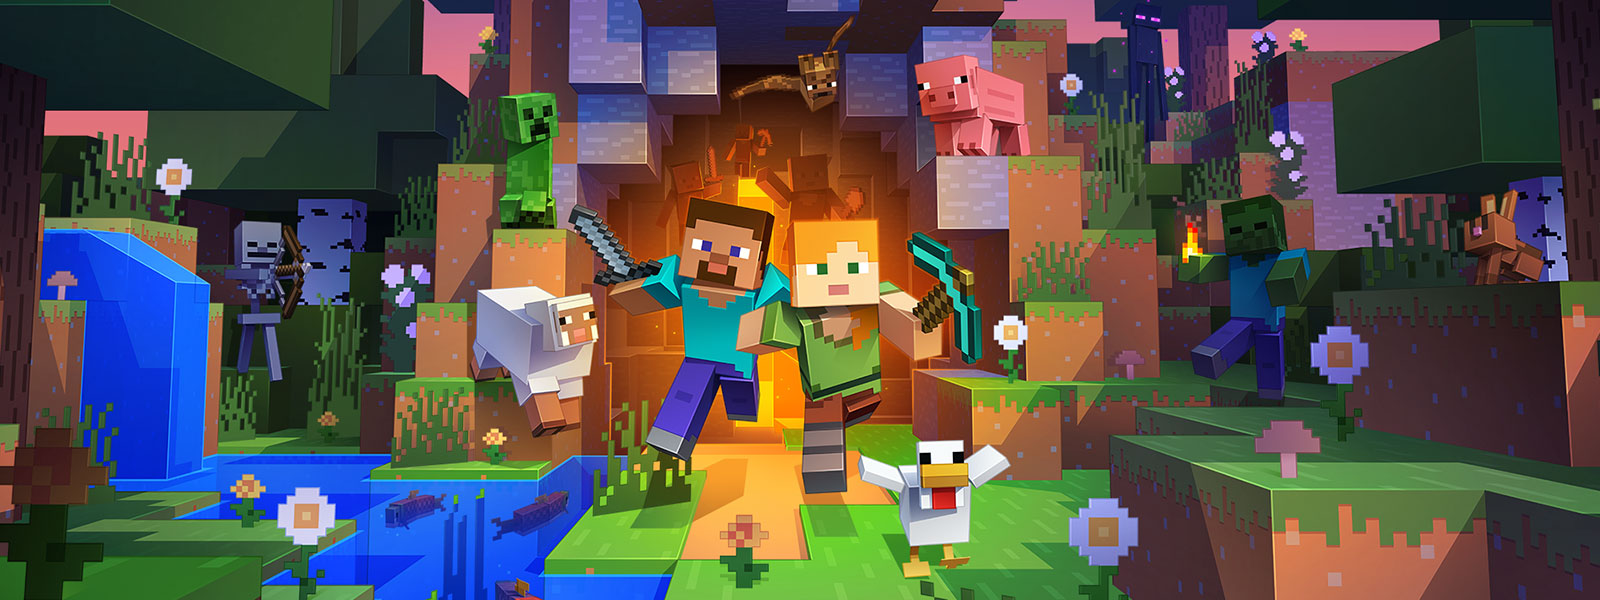 Two characters coming out of a tunnel with many creatures from the Minecraft world